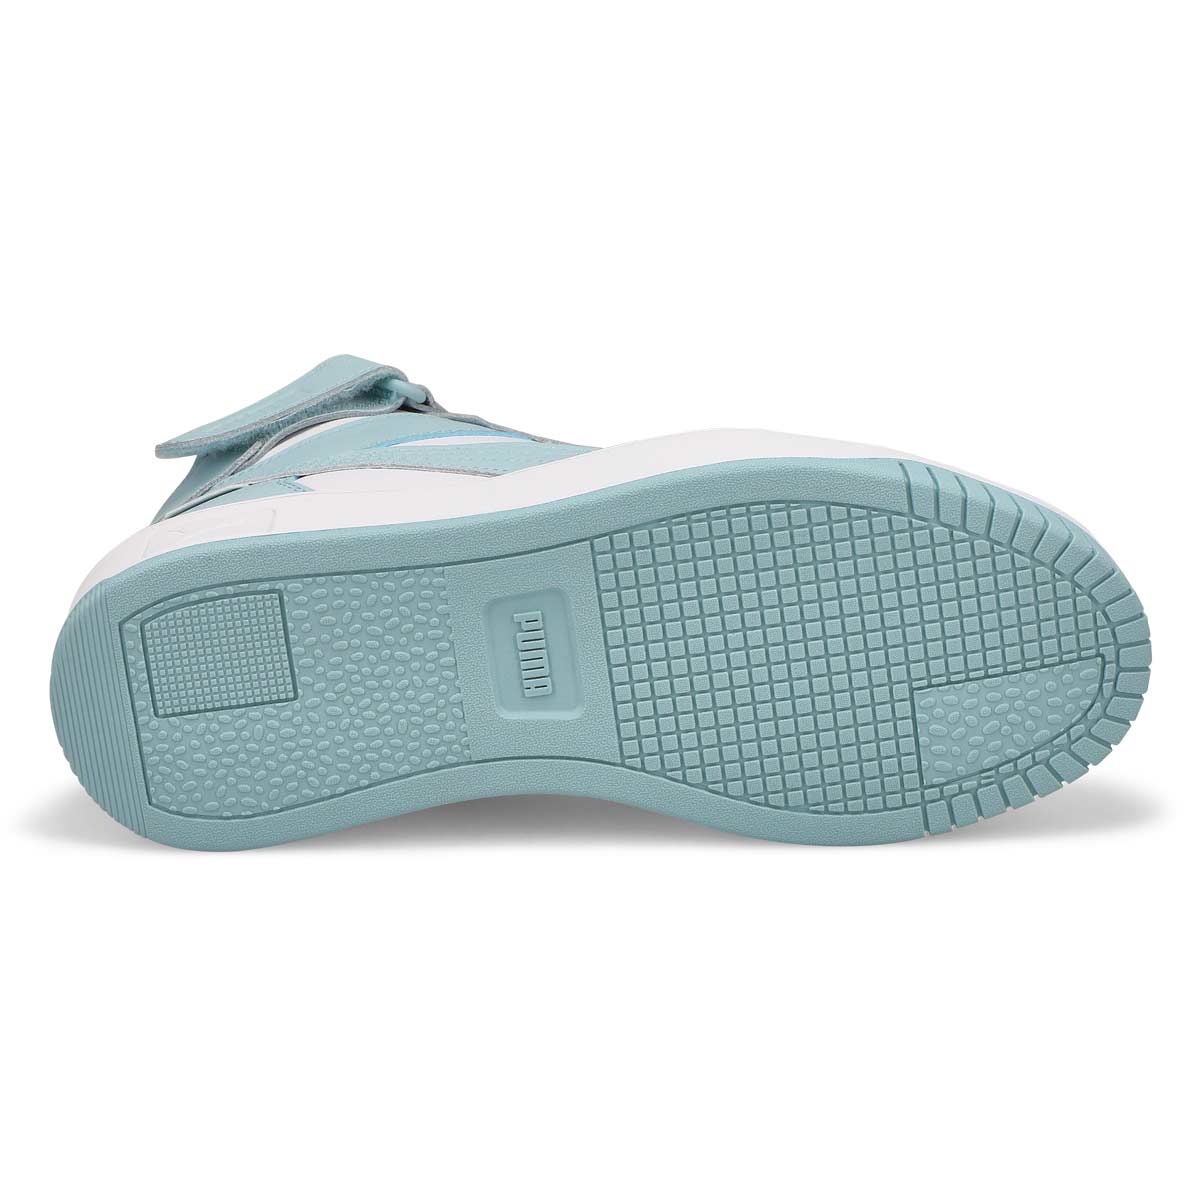 Women's Carina Street Mid Lace Up Sneaker- White/Turquoise